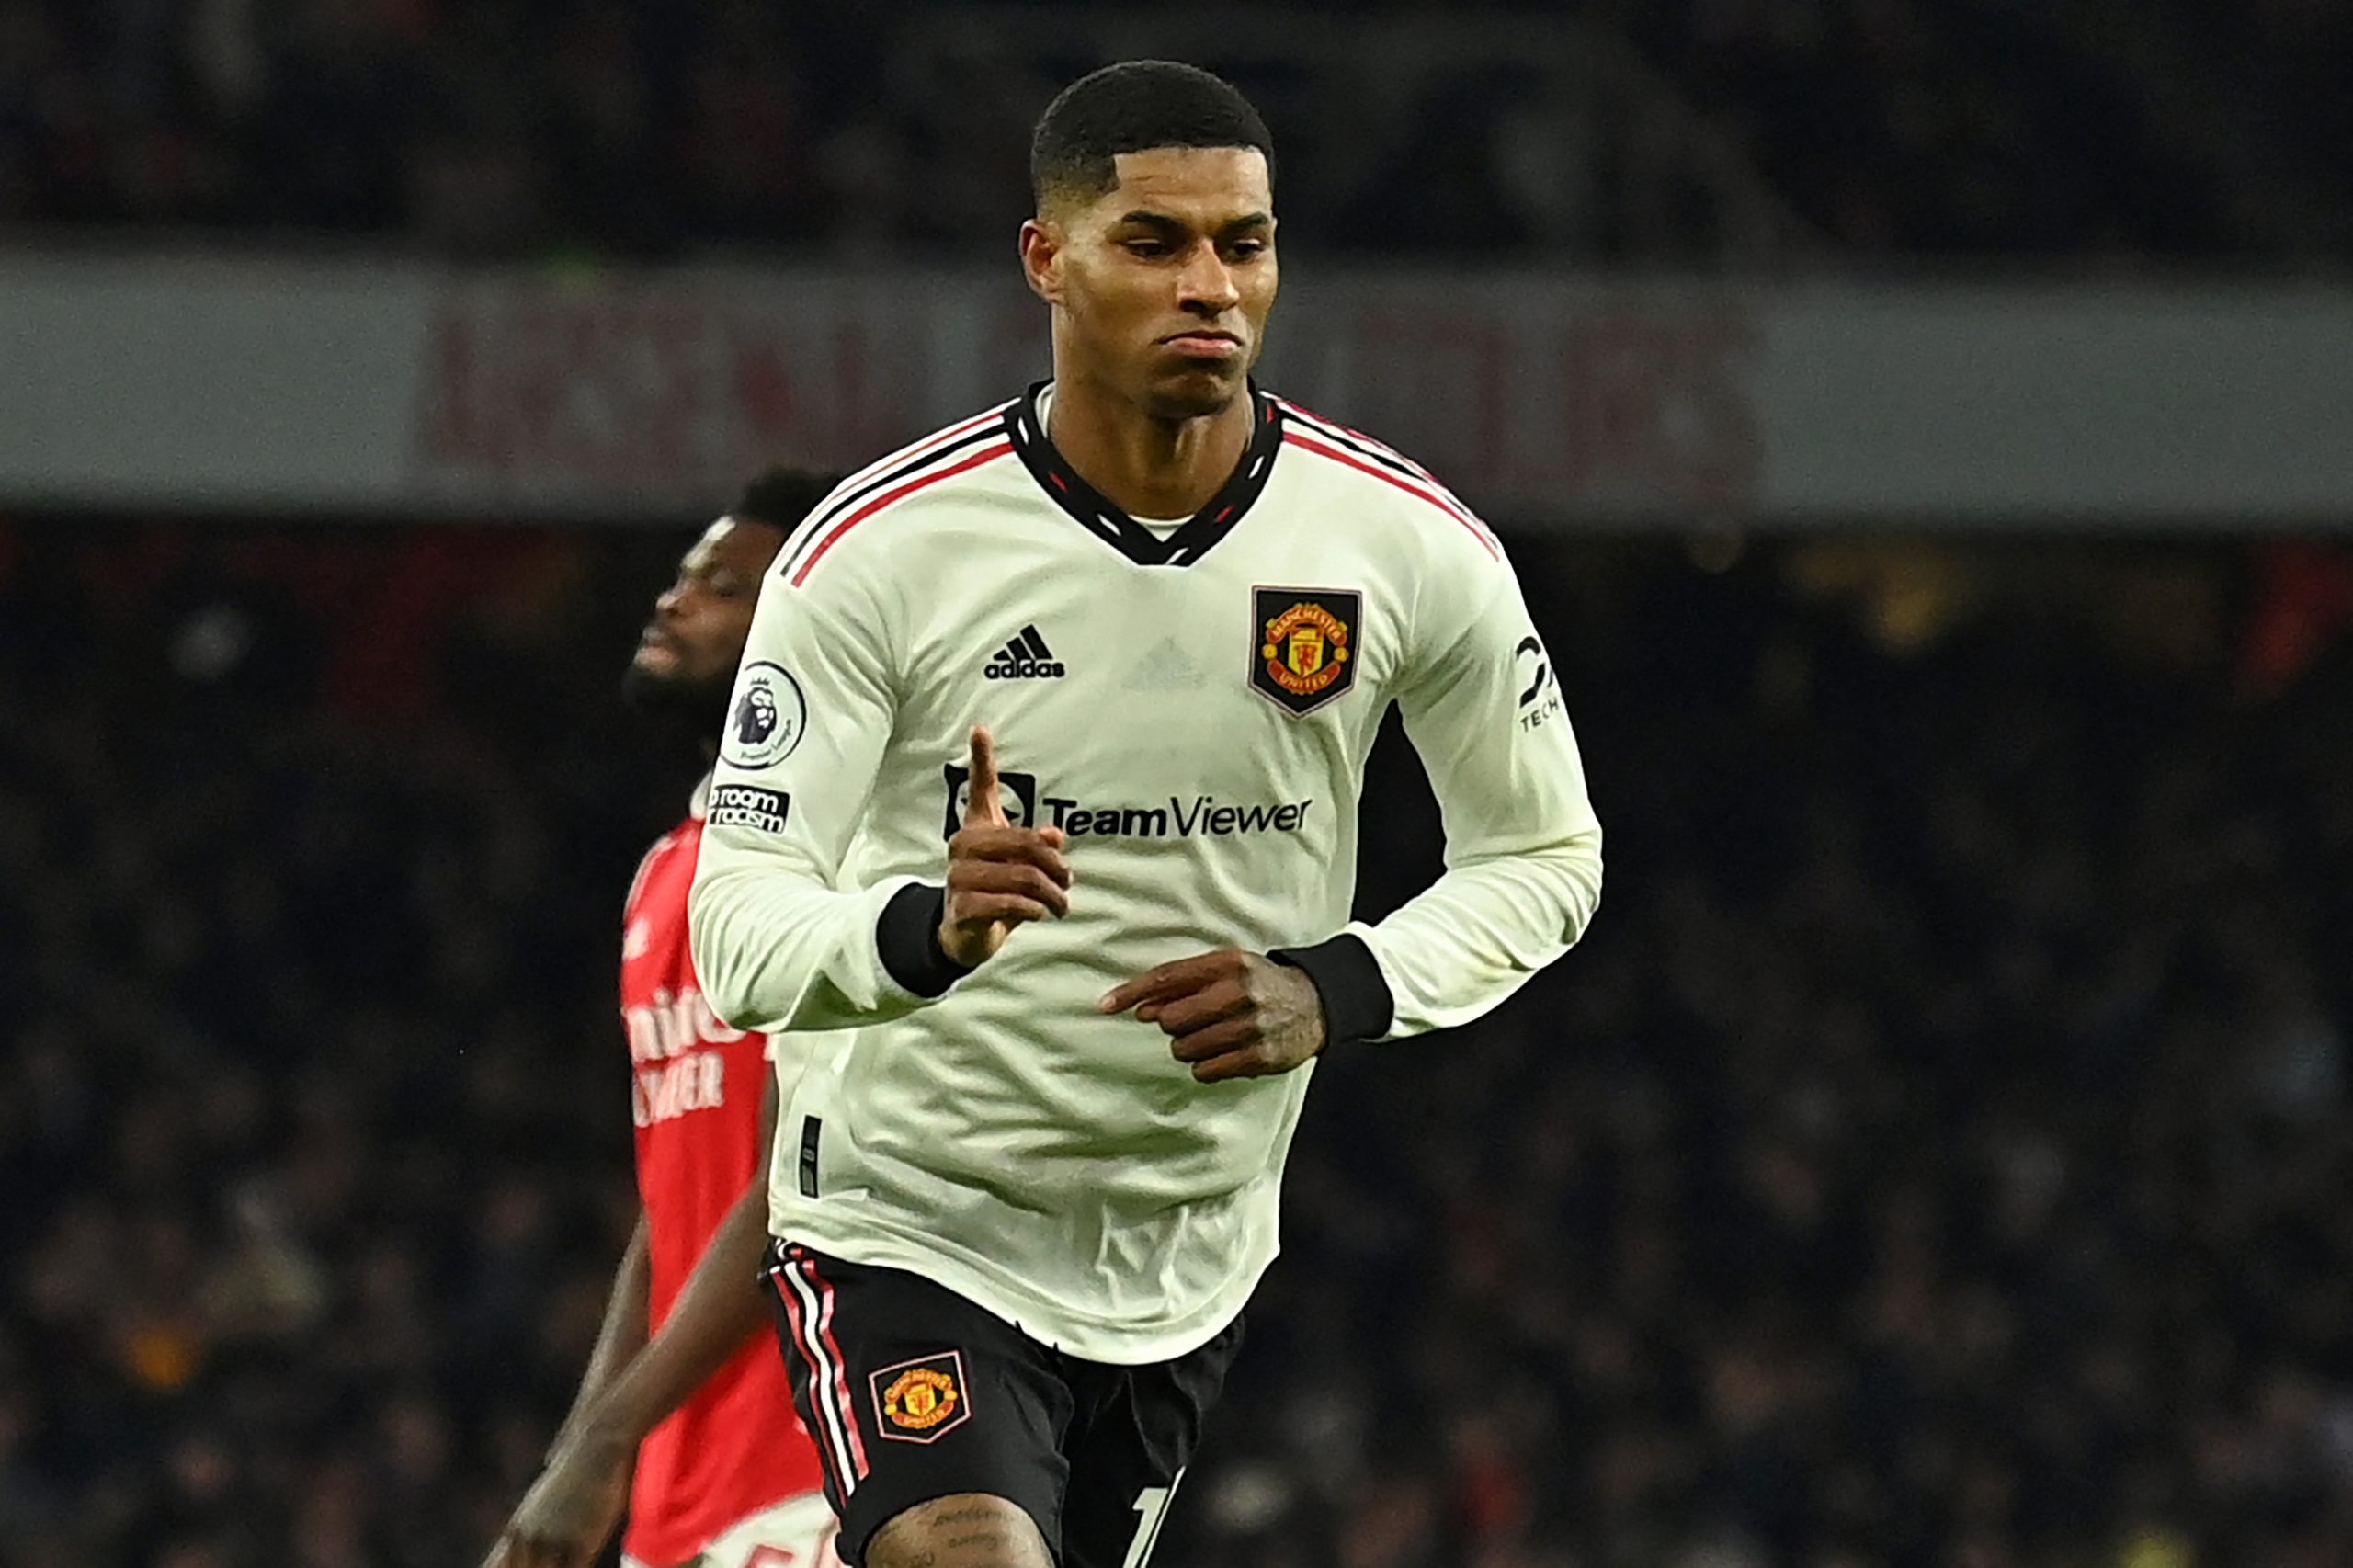 Marcus Rashford is in the Manchester United squad for the final following an injury scare.